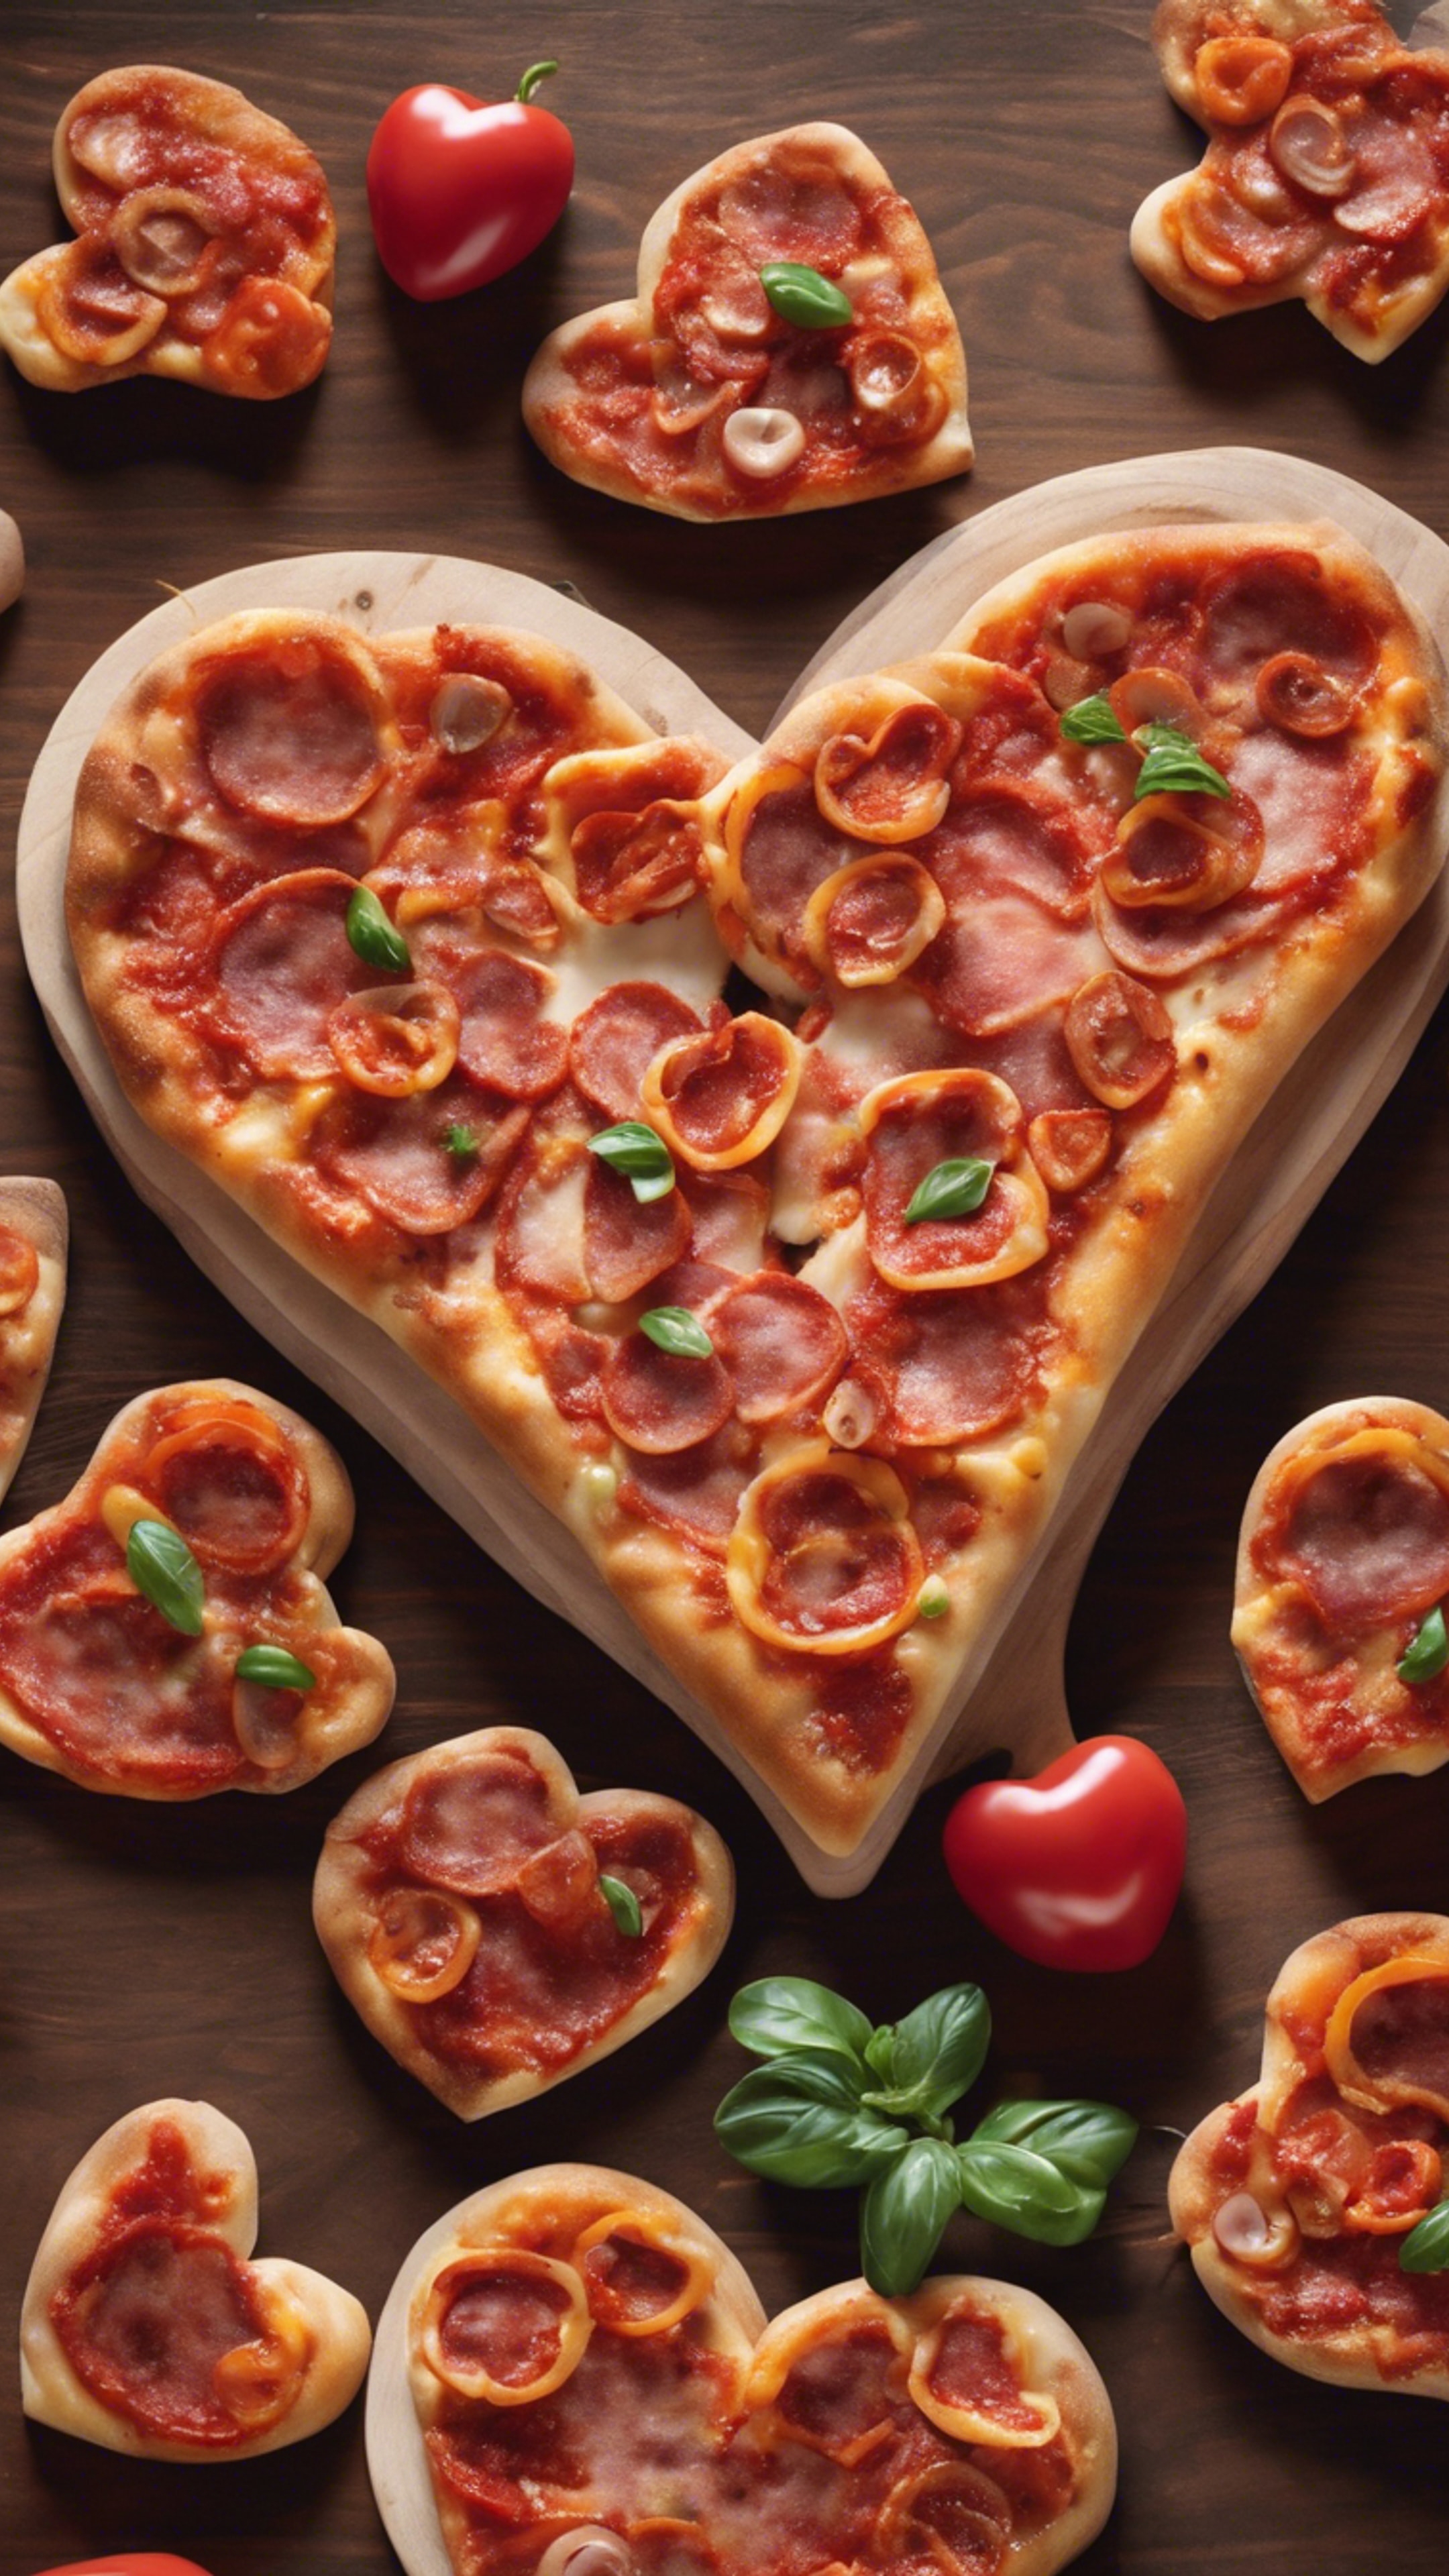 A heart-shaped pizza topped with pepperonis arranged in a smaller heart shape, the perfect cuisine for a romantic date. Fondo de pantalla[15df62b77c2f46a18143]